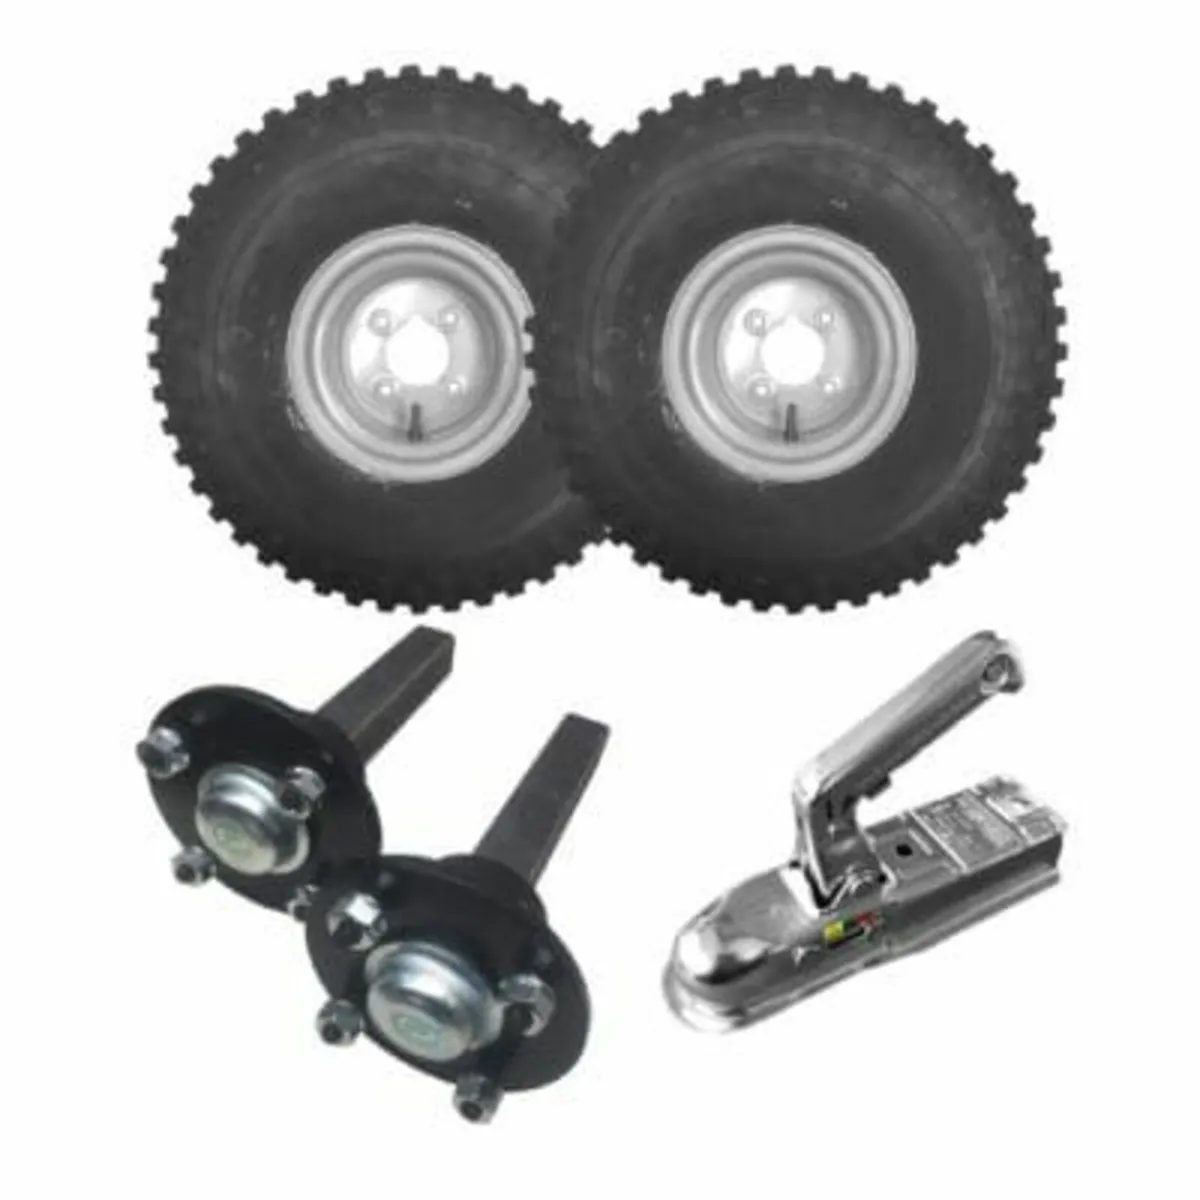 Off road quad trailer kits ONLY hubs hitch